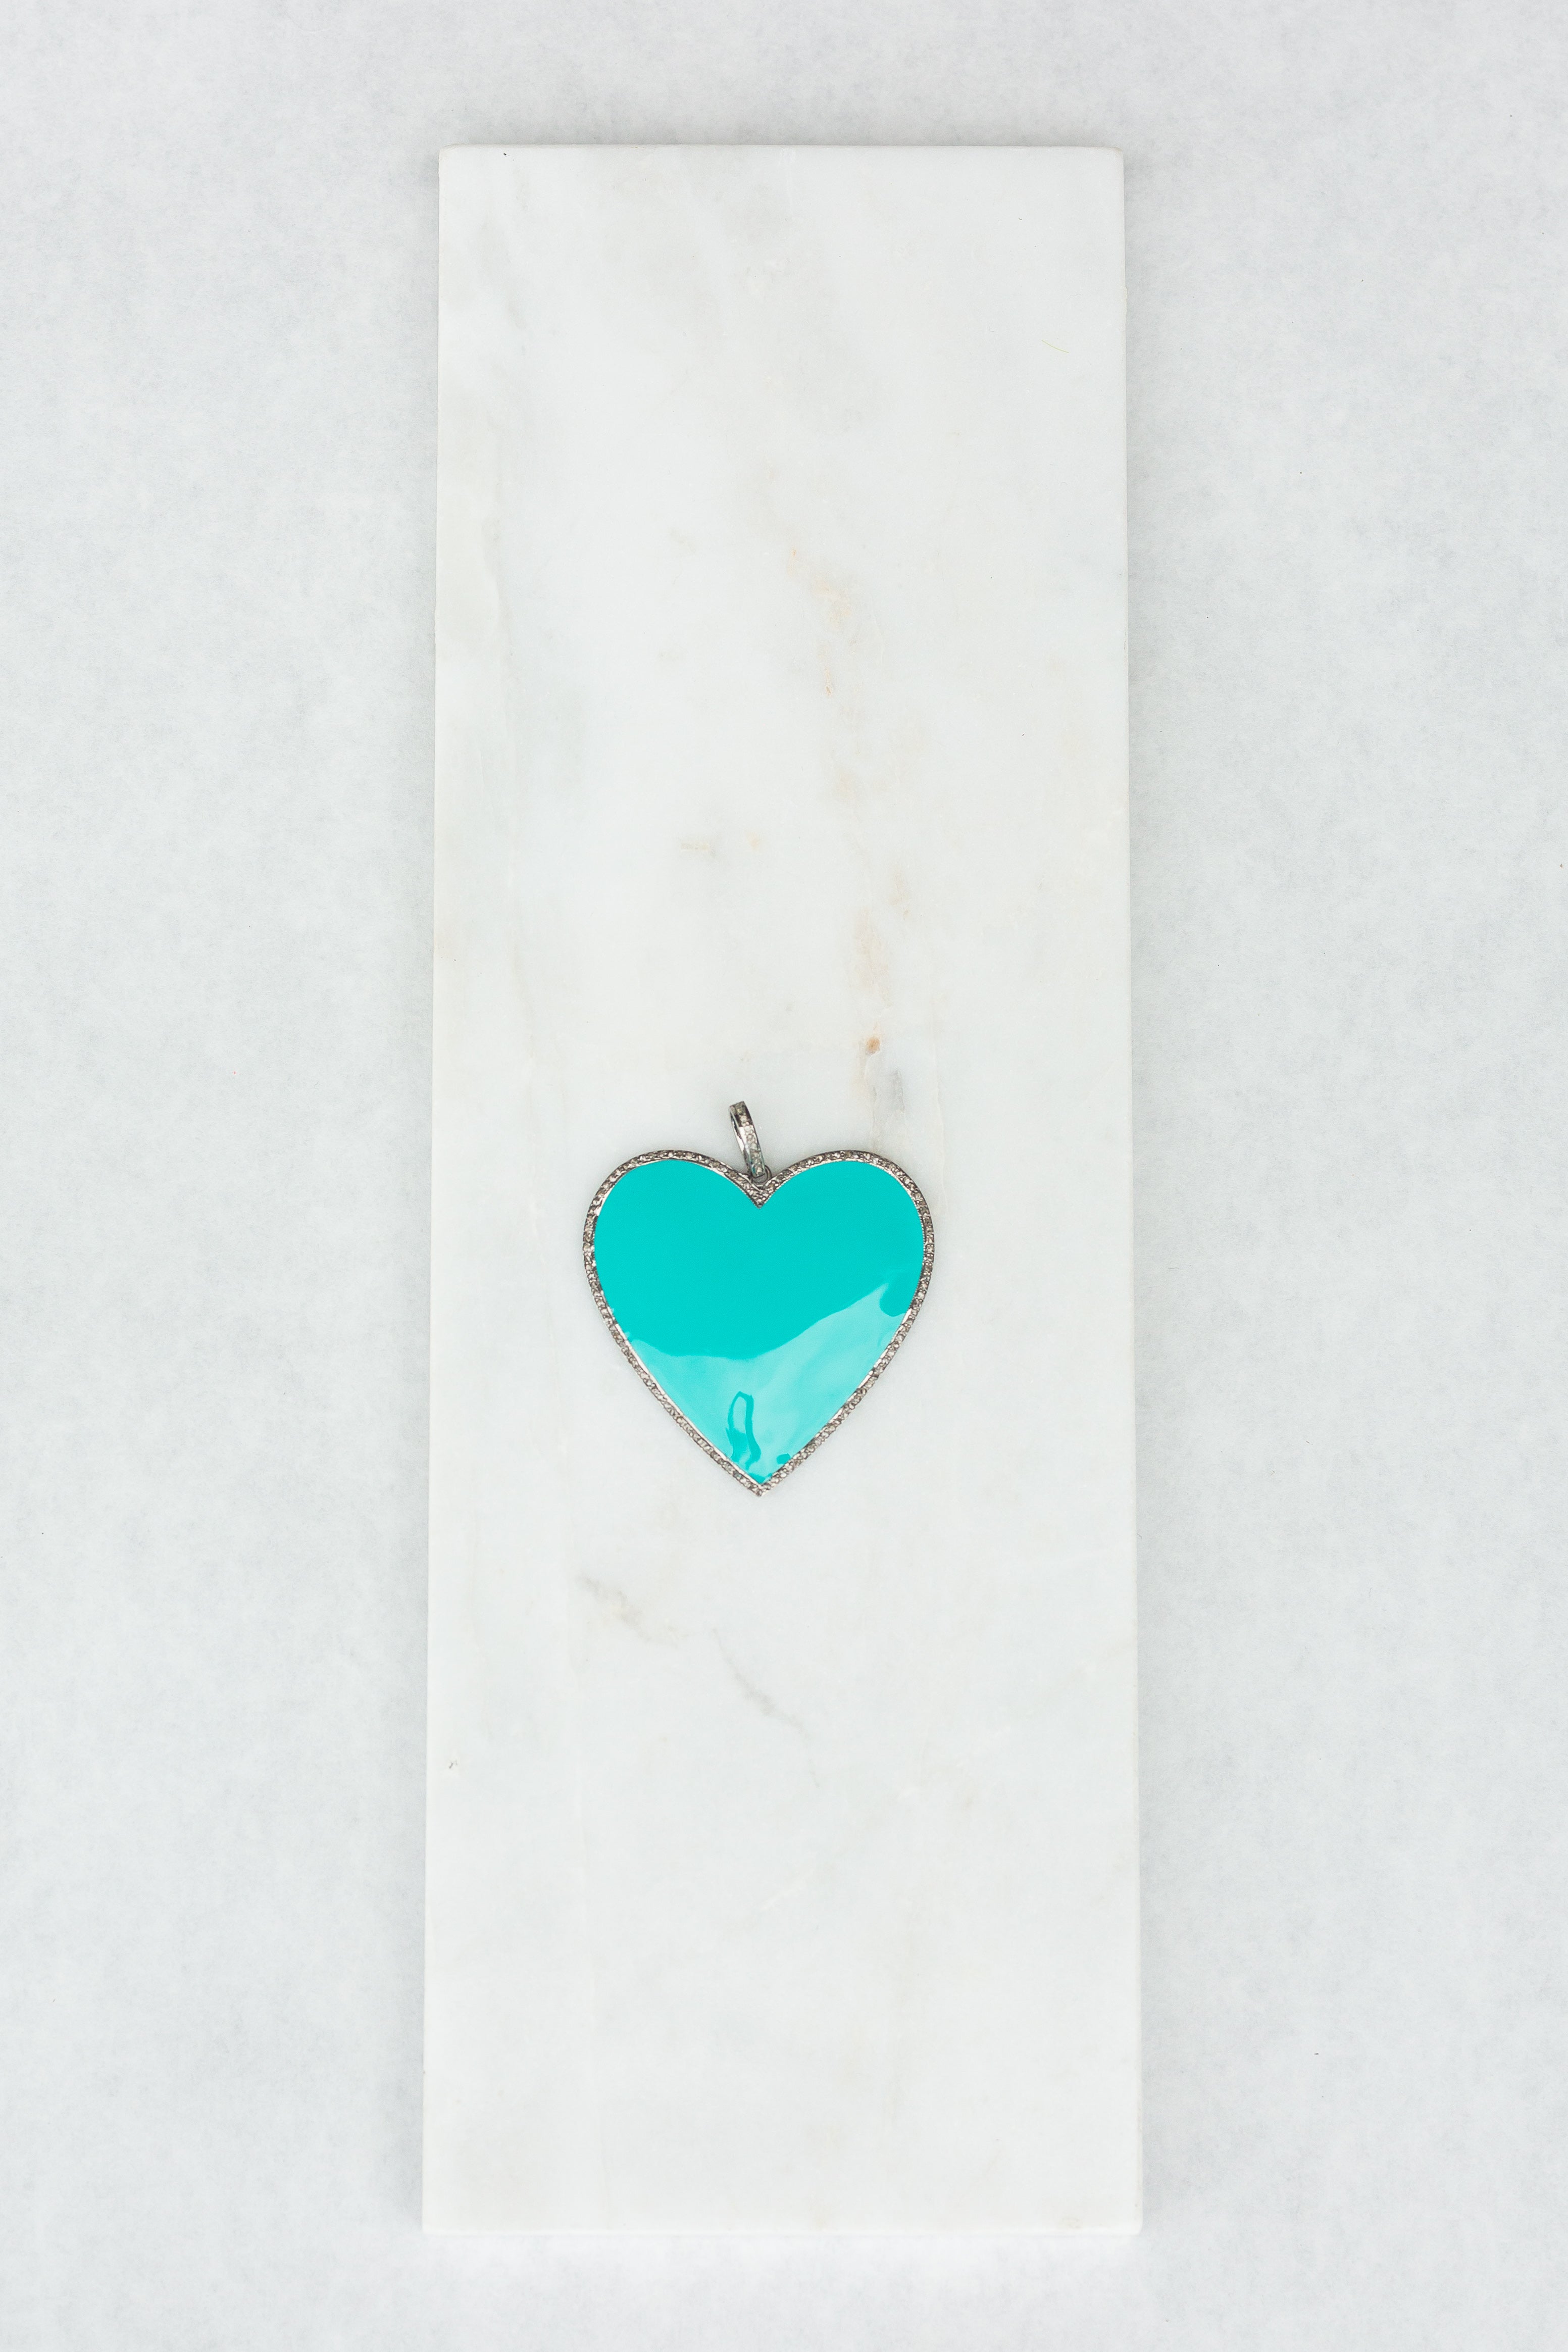 c100- Big Heart  Silver/Turquoise